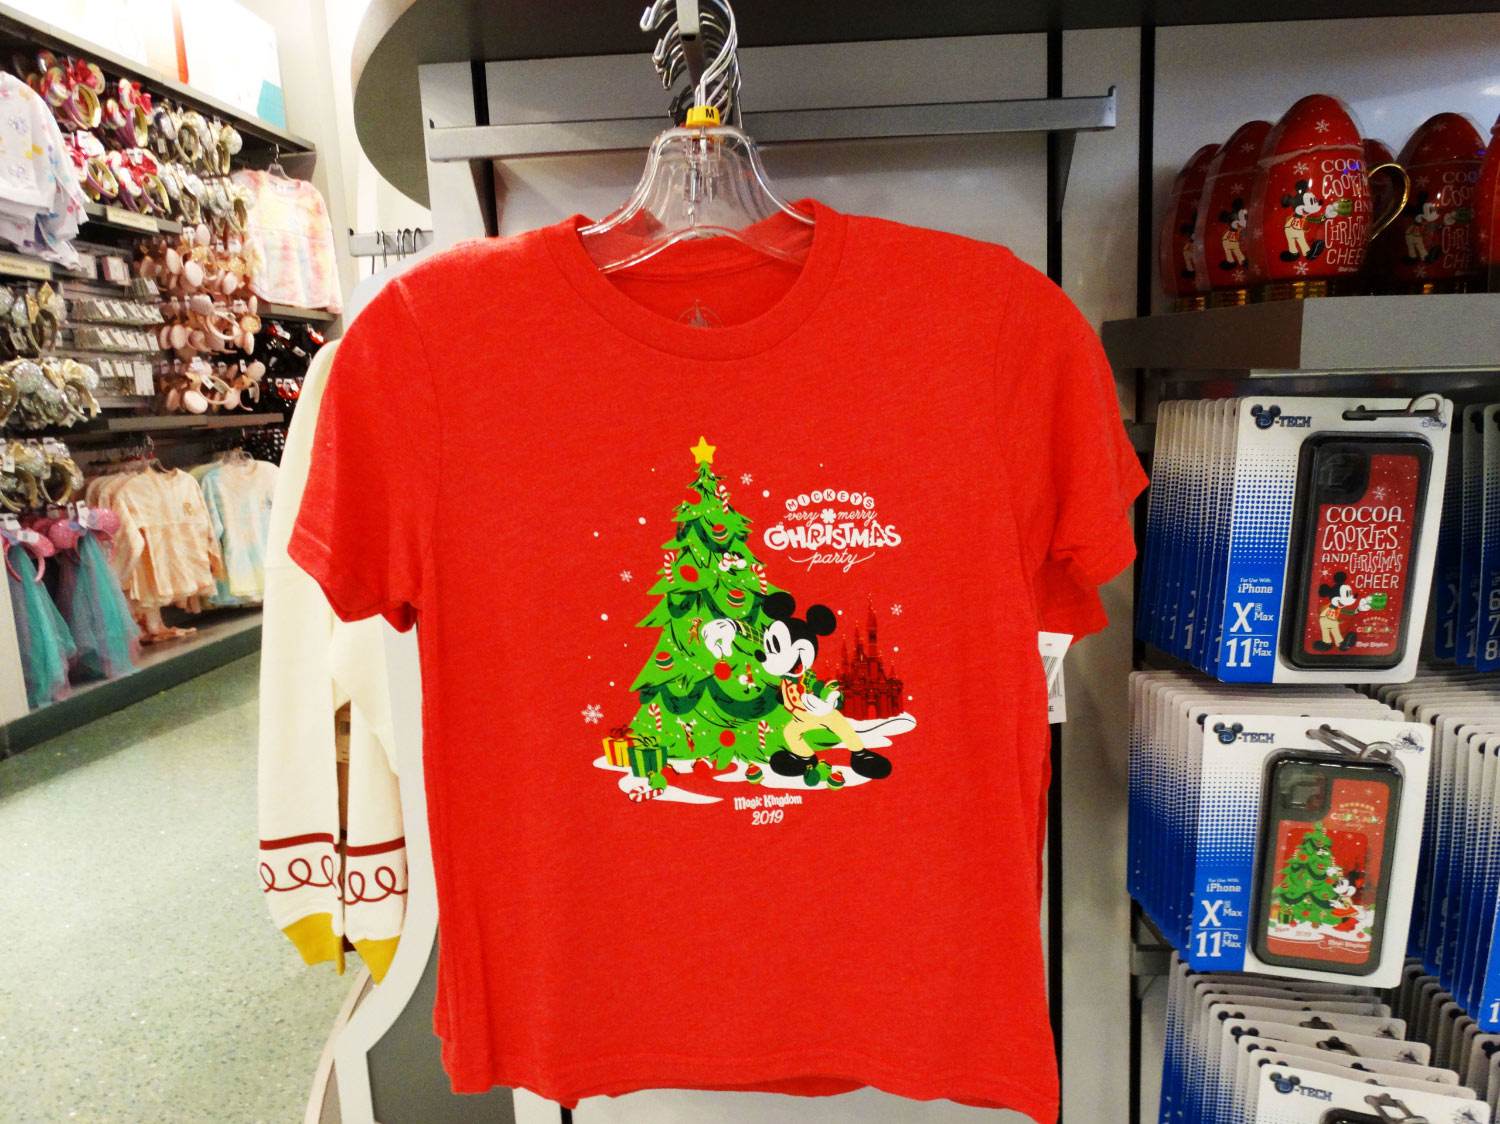 Red short sleeve tee on a hanger inside of a store during Mickey's Very Merry Christmas Party 2019 at the Magic Kingdom® Park. Shirt sports Christmas Tree graphic with Mickey Mouse decorating the tree and the name of the event on the top right of the center graphic. Lake Buena Vista, Florida.